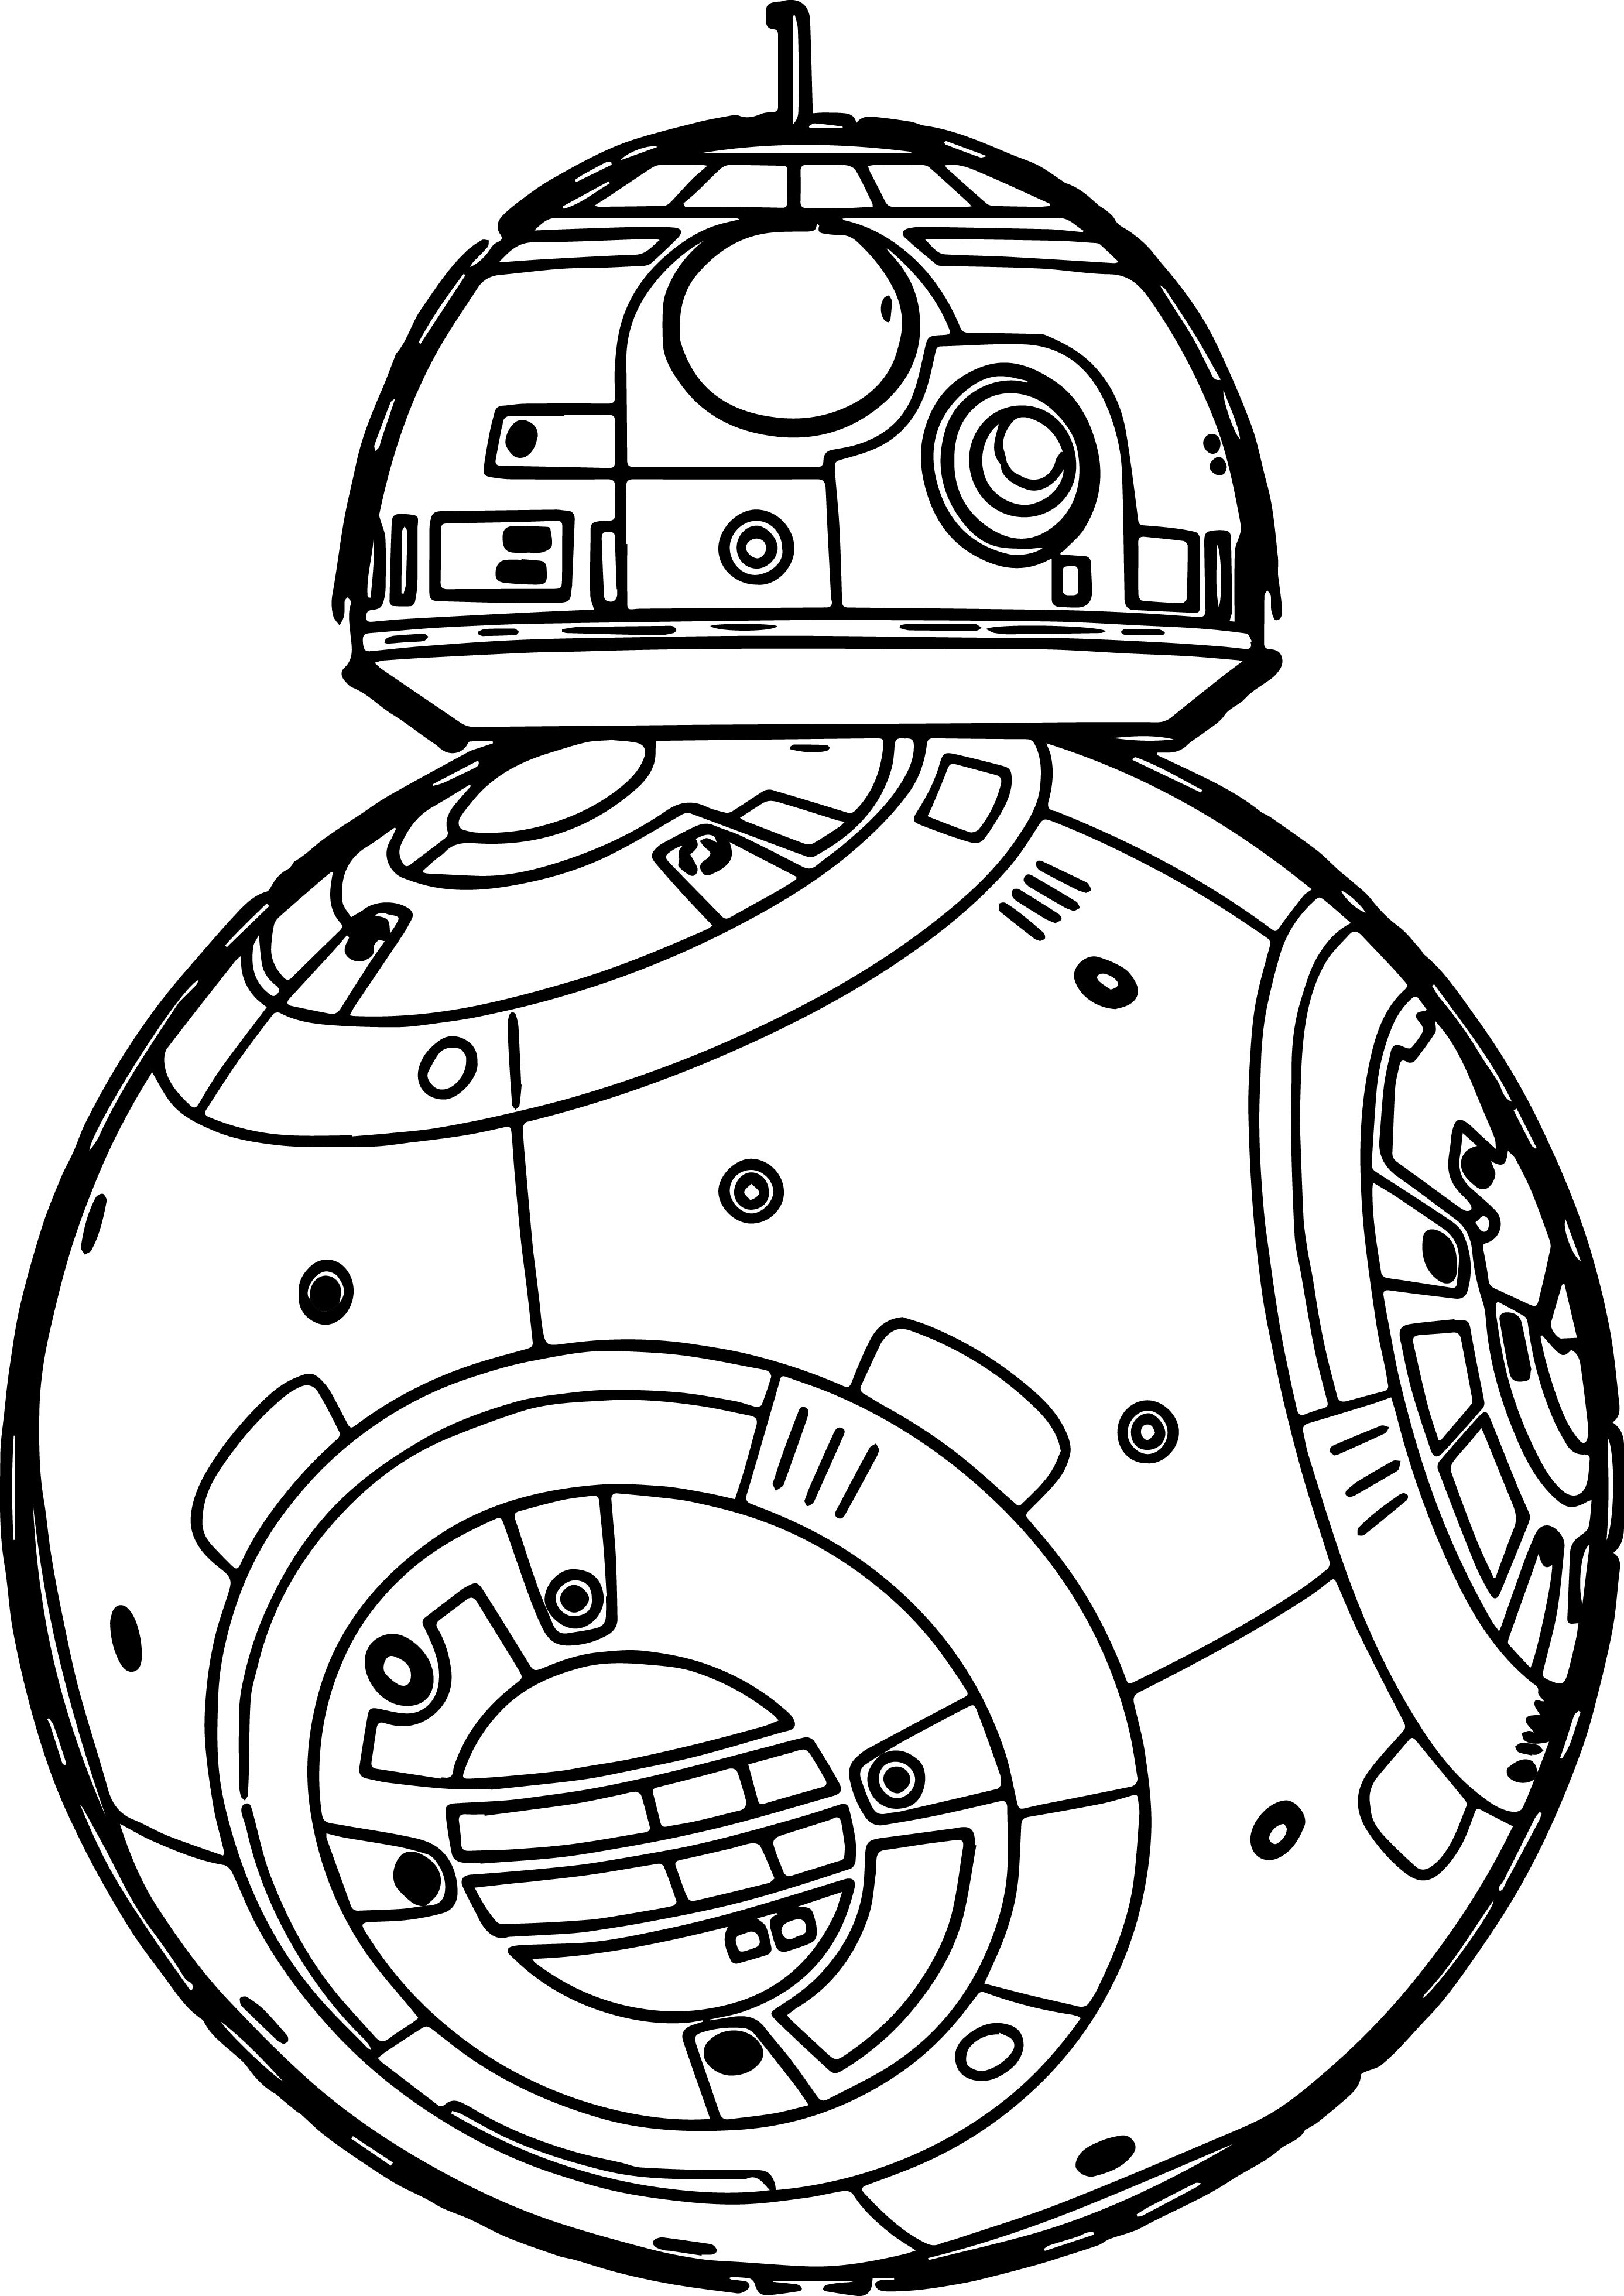 Easy Star Wars Coloring Pages at Free printable